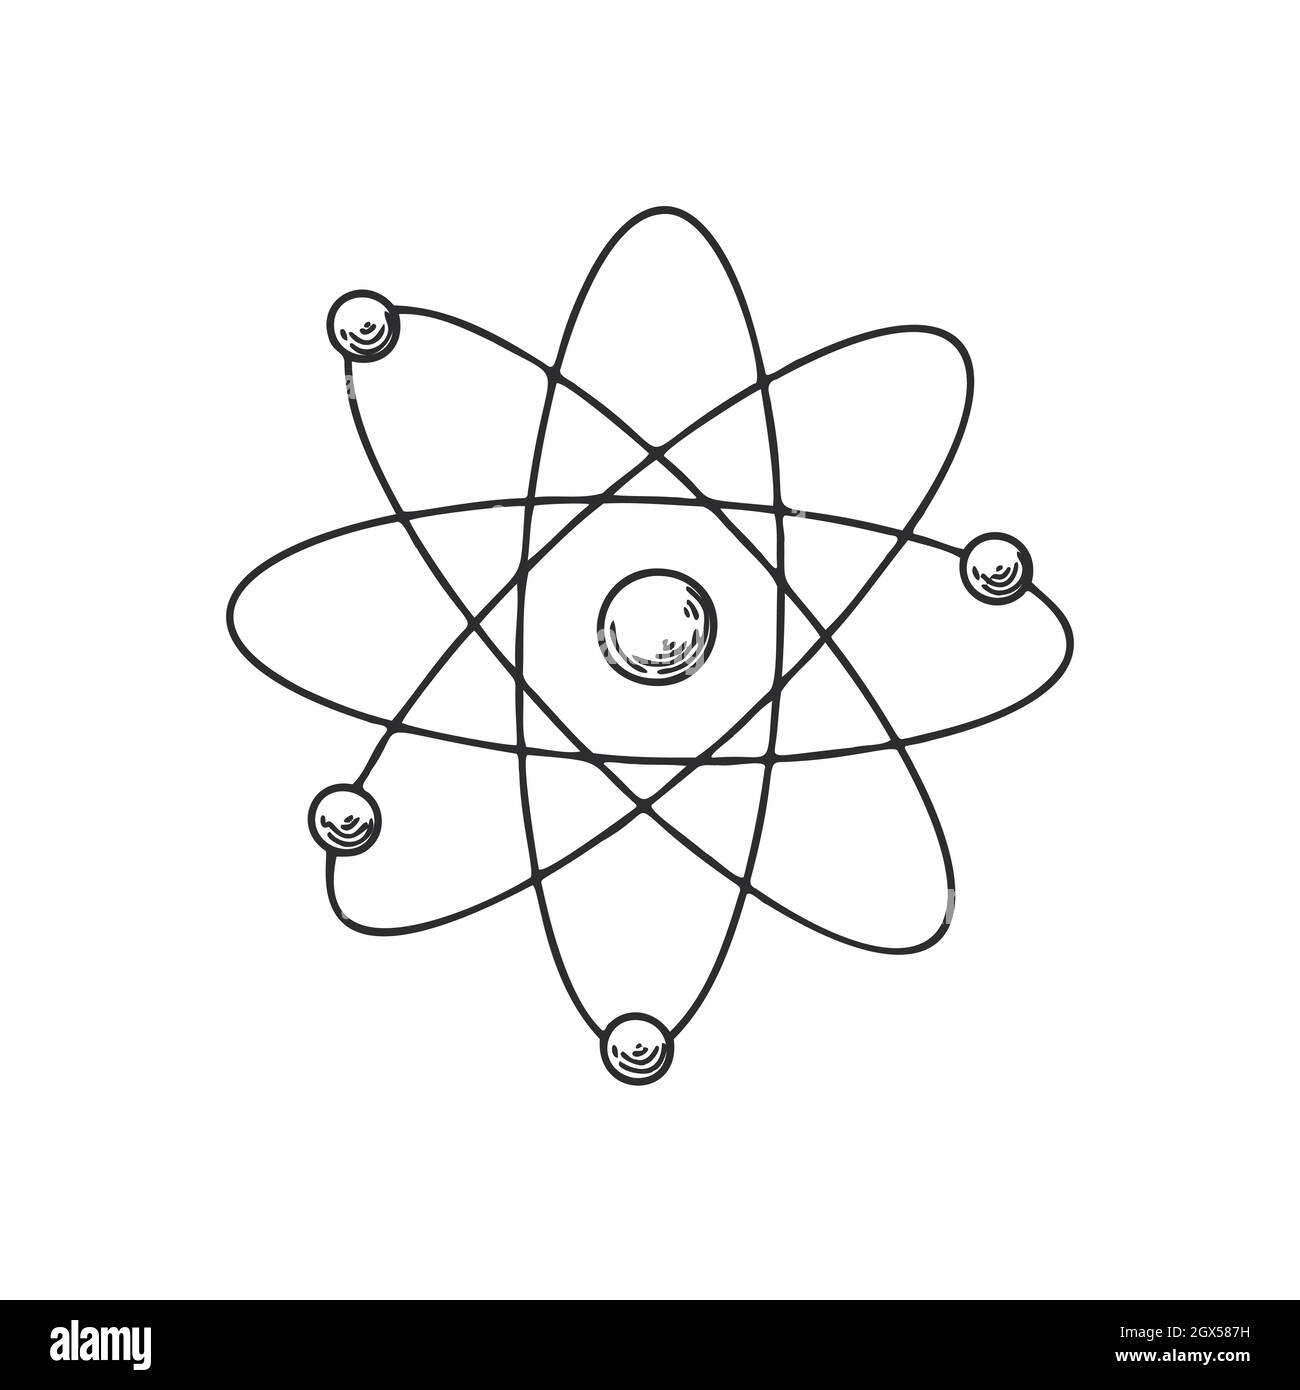 Sketch atomic structure icon. Sketch atom. Discovery and chemistry symbol. Vector Stock Vector